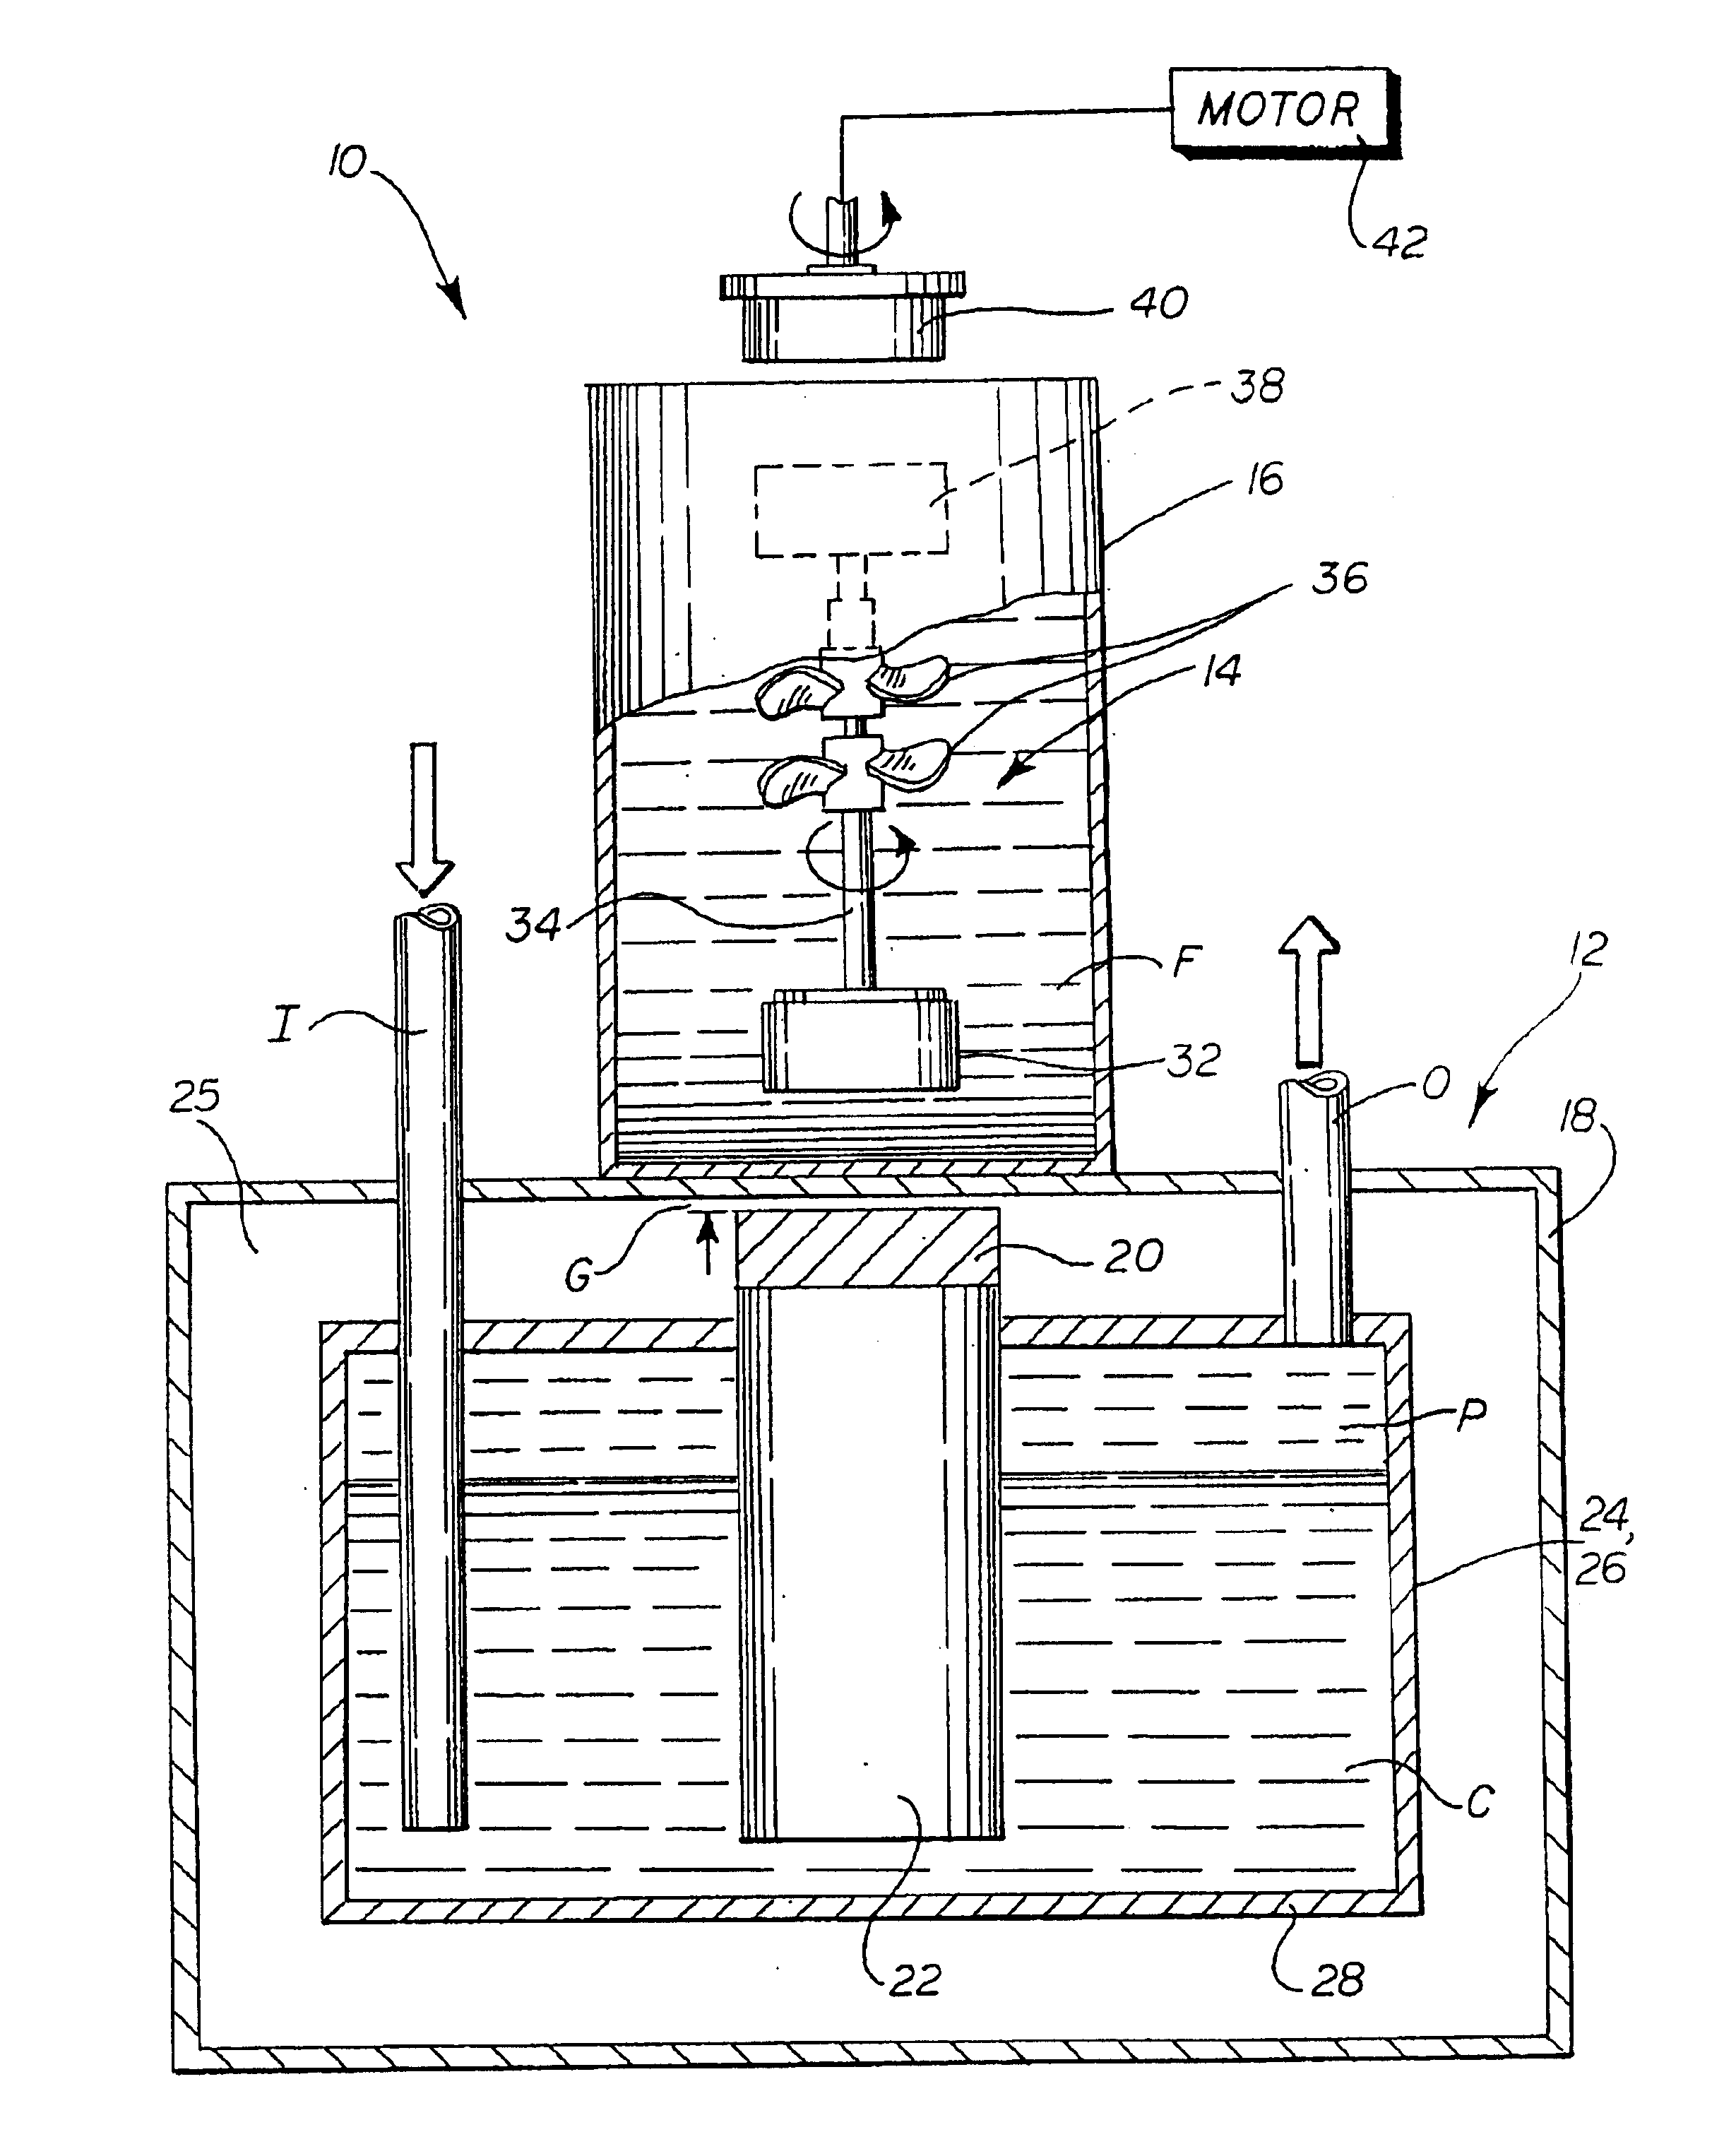 Set-up kit for a pumping or mixing system using a levitating magnetic element